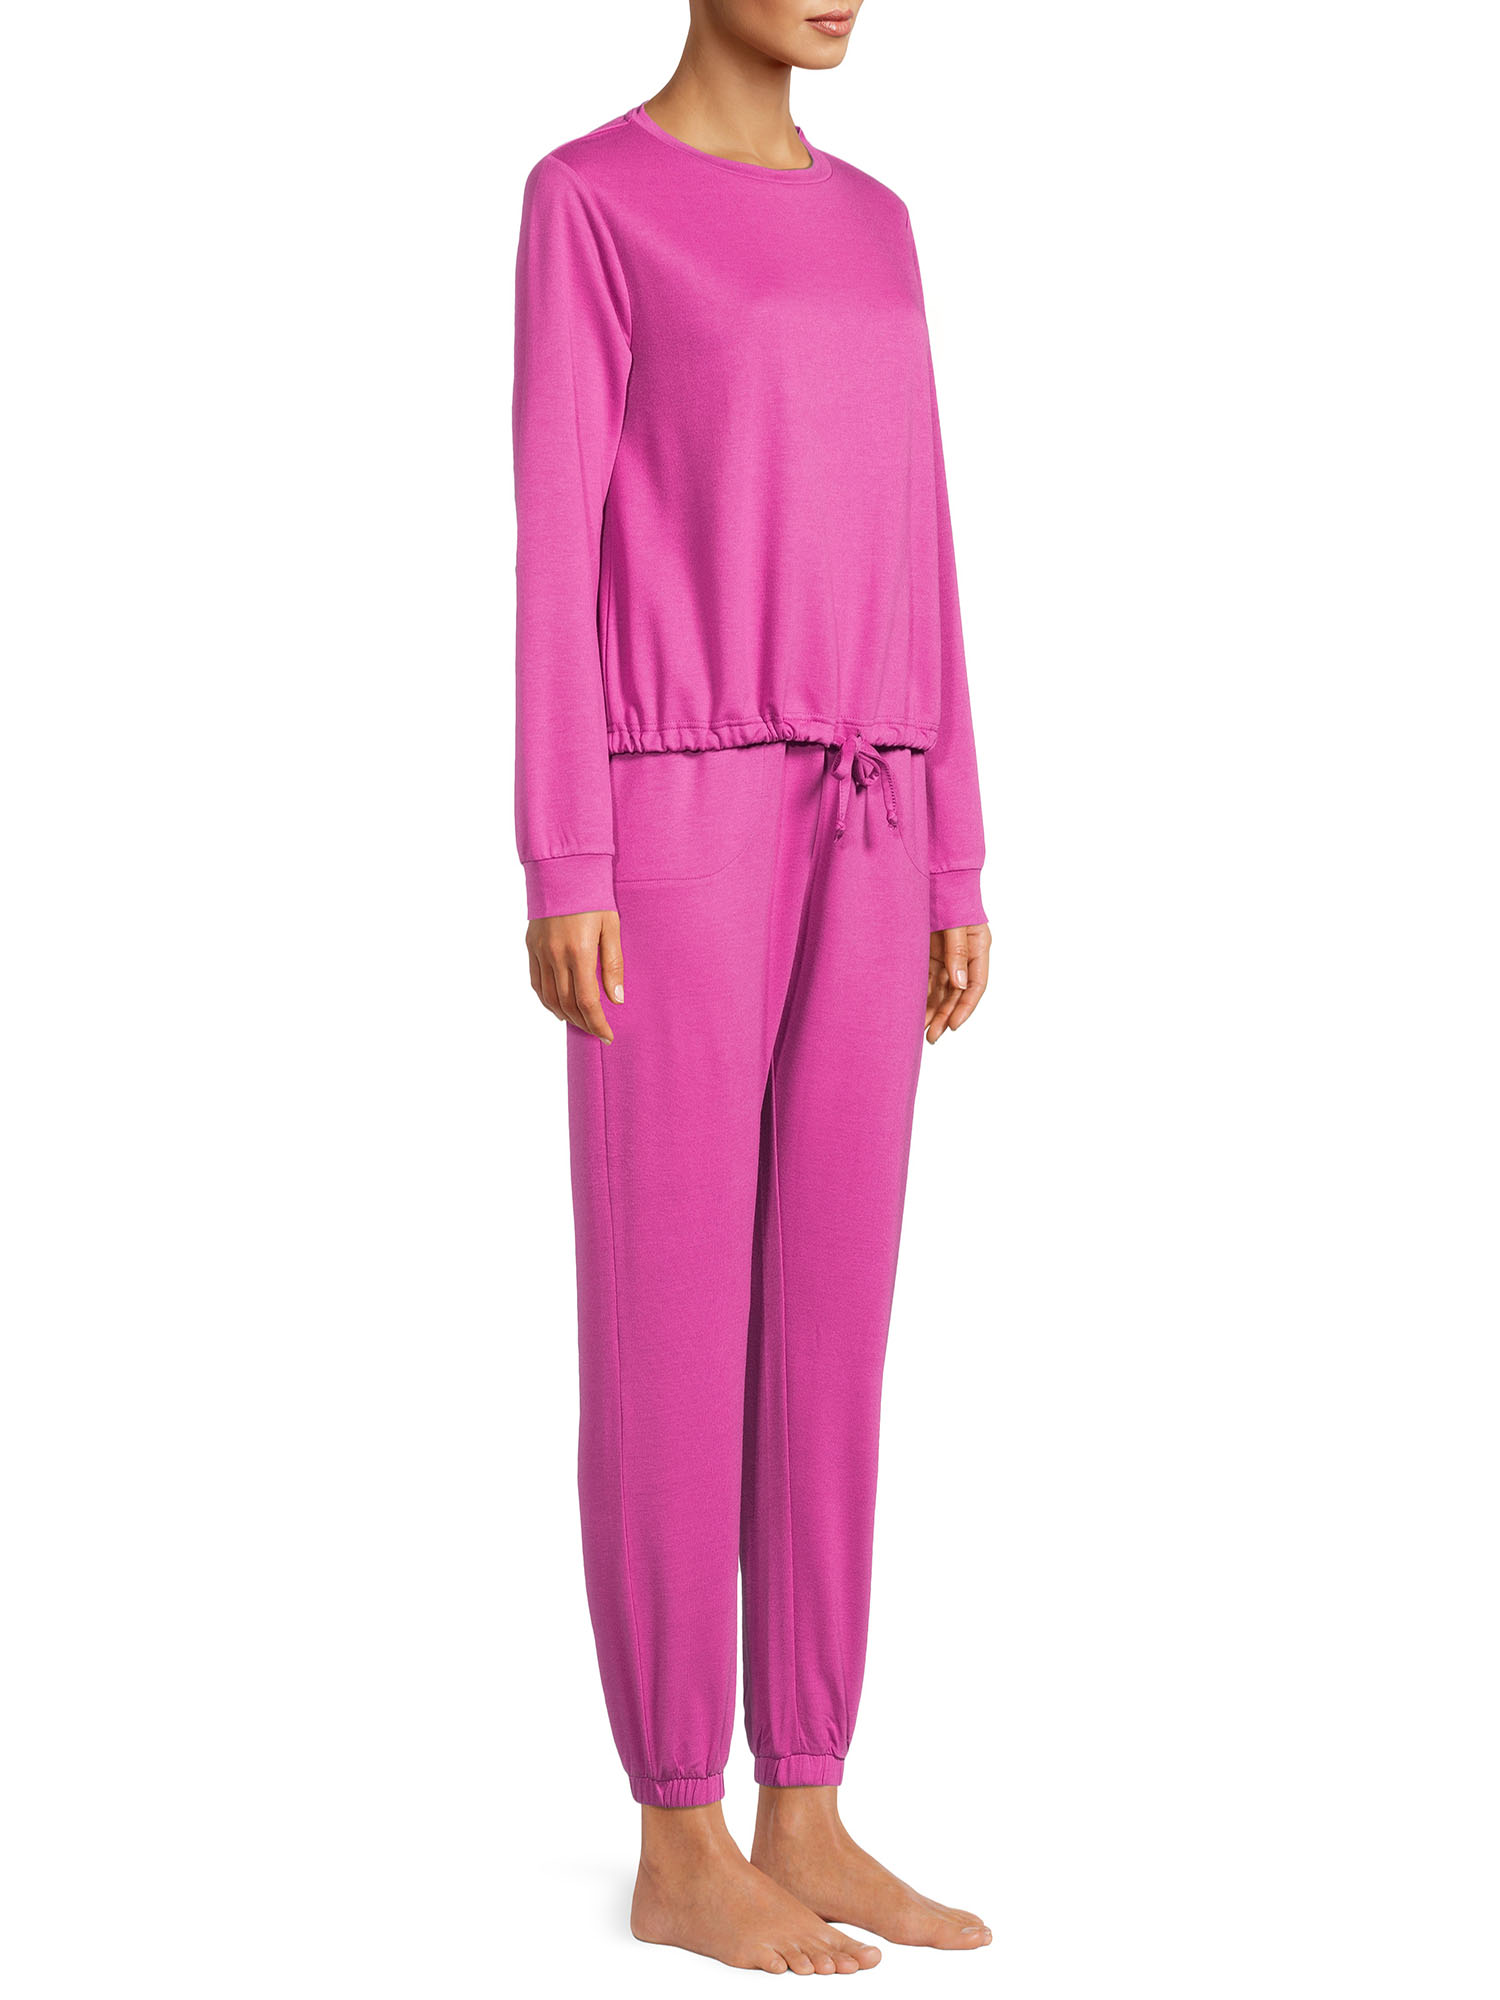 Lissome Women's and Women's Plus L/S French Terry 2-Piece PJ Set - image 4 of 6